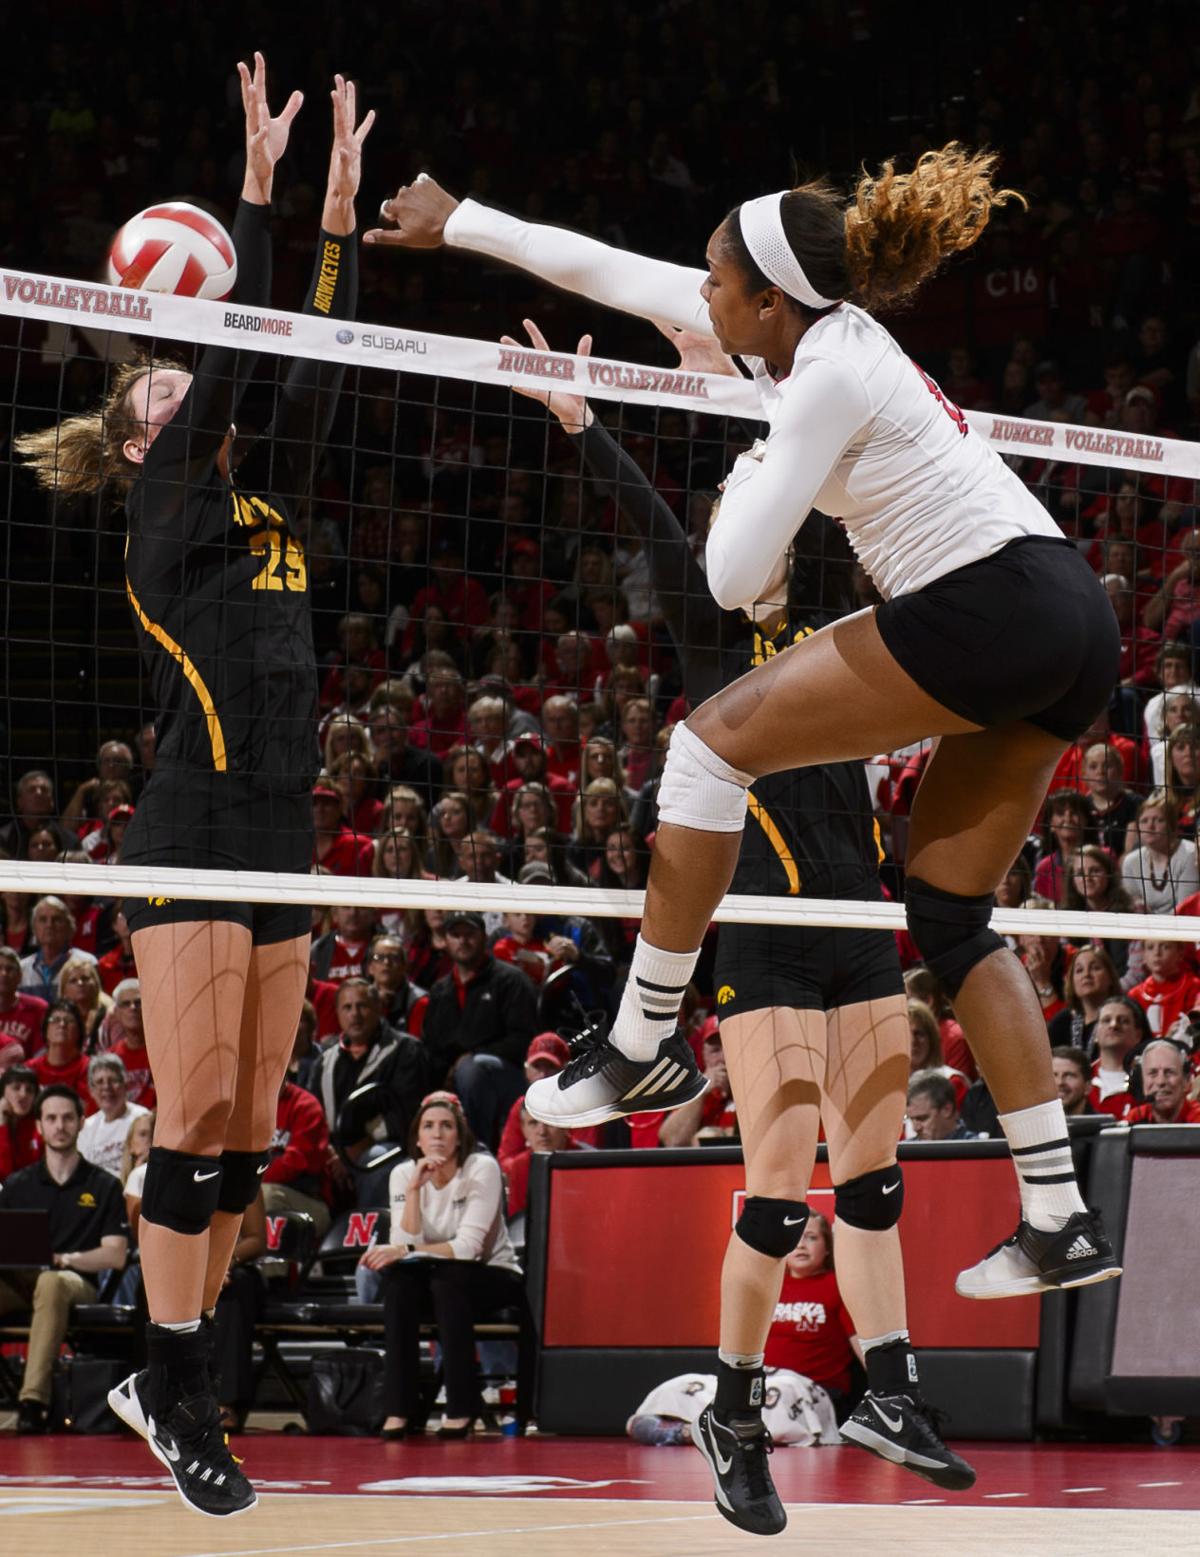 Huskers start flat, but finish out sweep of Iowa Volleyball